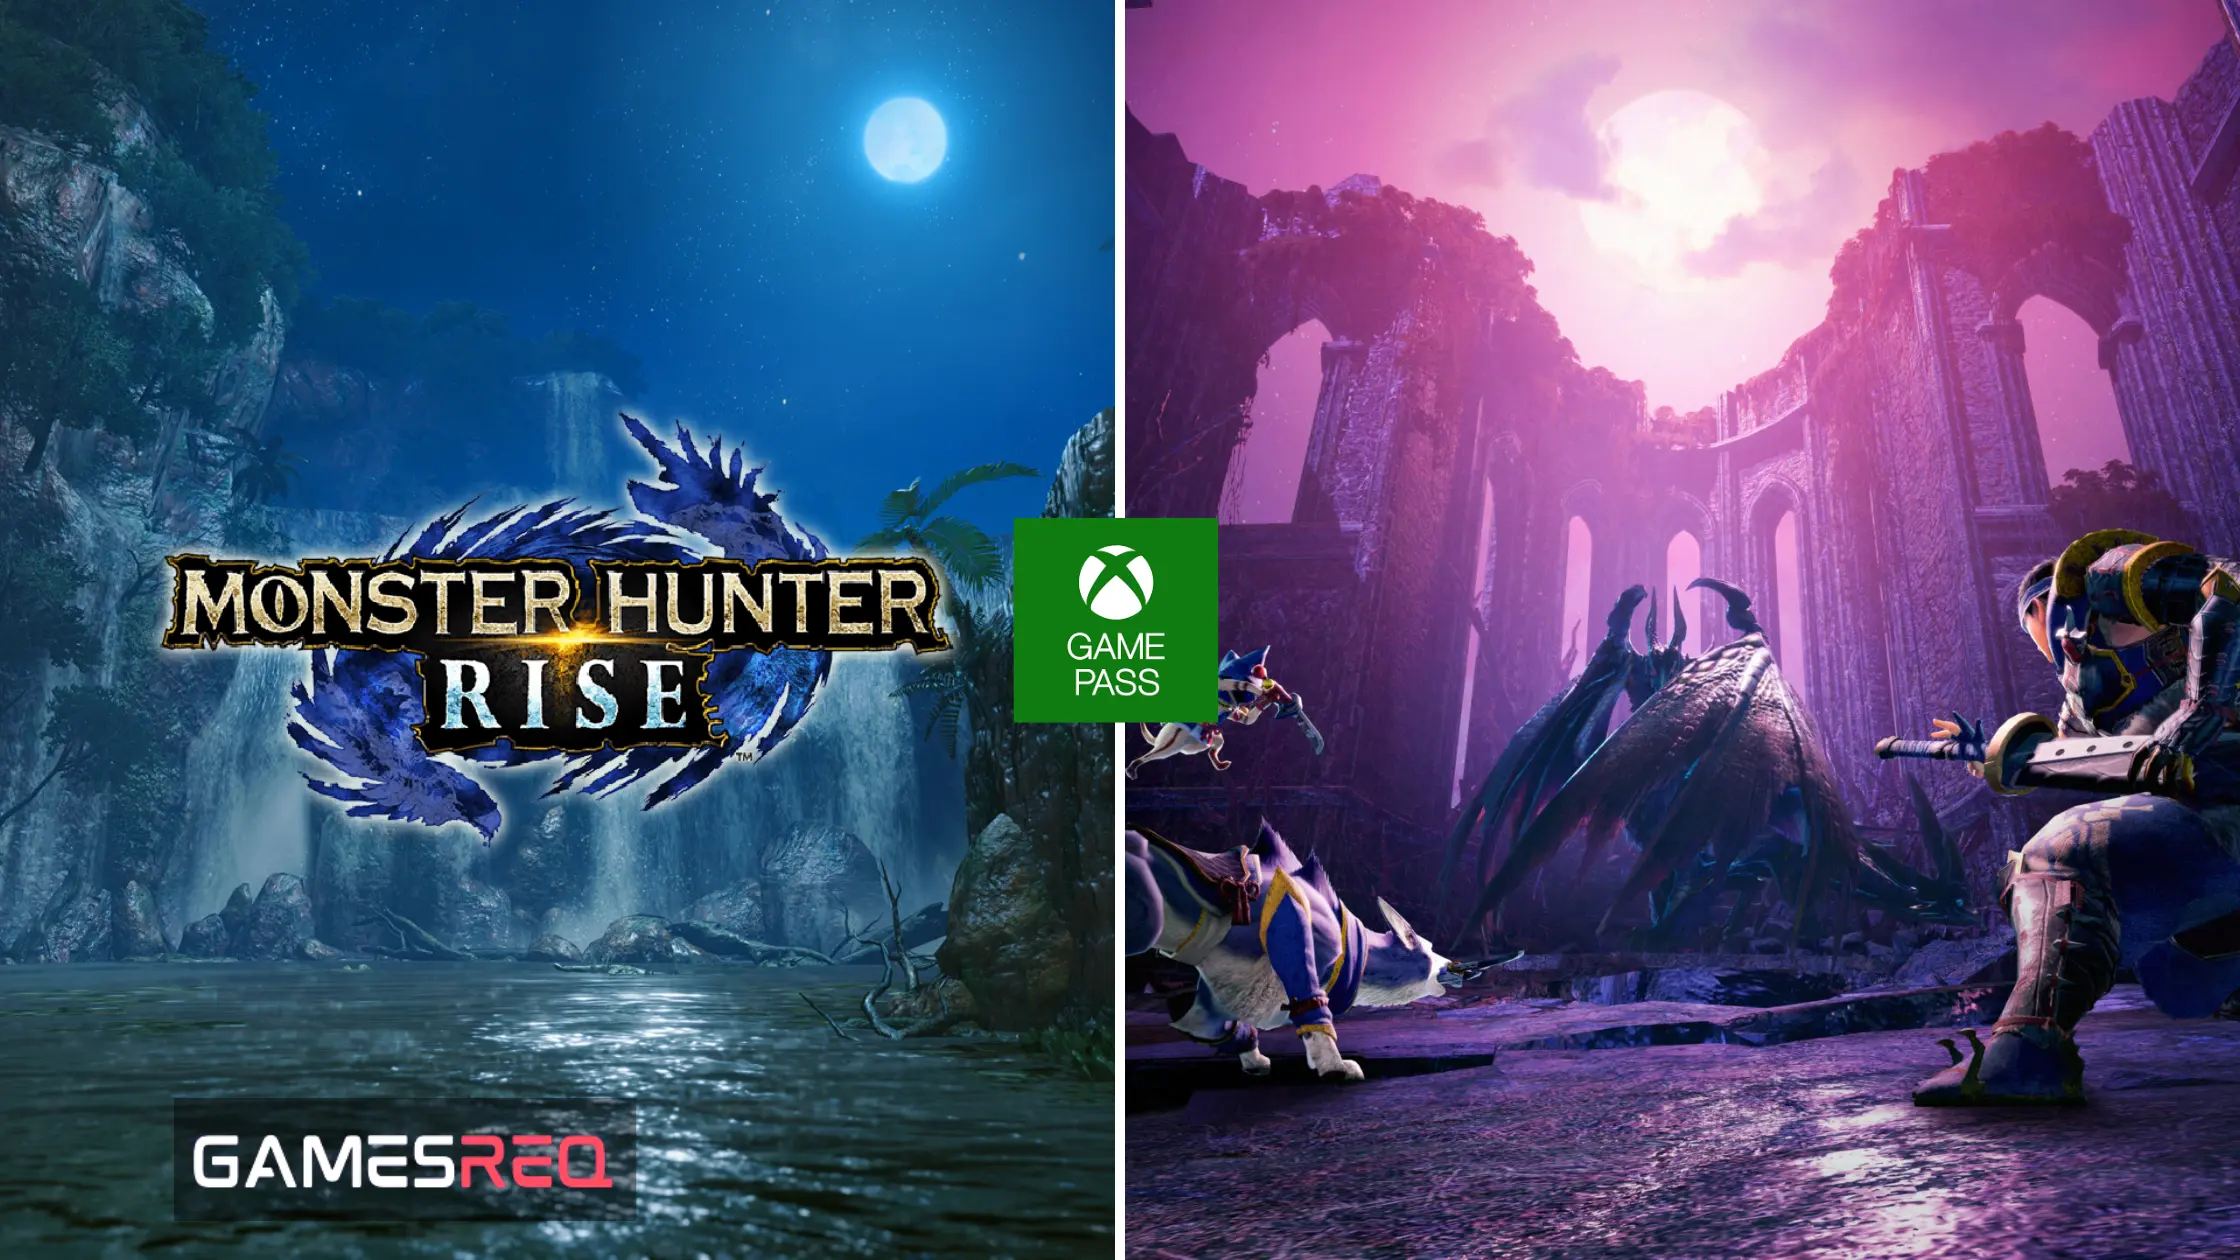 Xbox Game Pass Upcoming Games in January 2023 Monster Hunter Rise